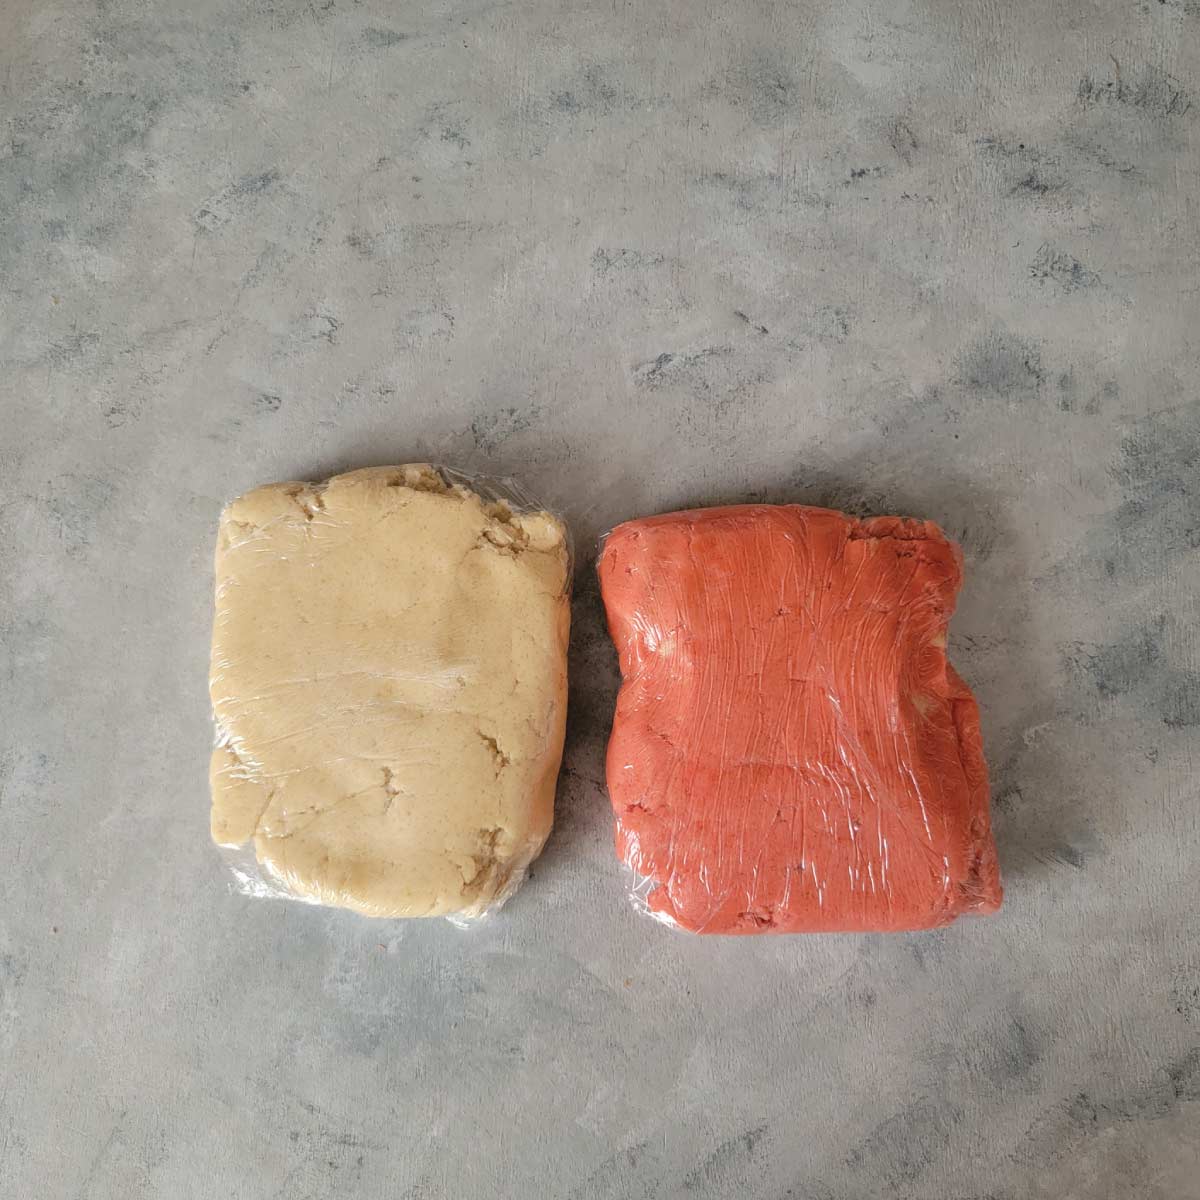 Pink cookie dough and regular cookie dough wrapped separately in plastic wrap.